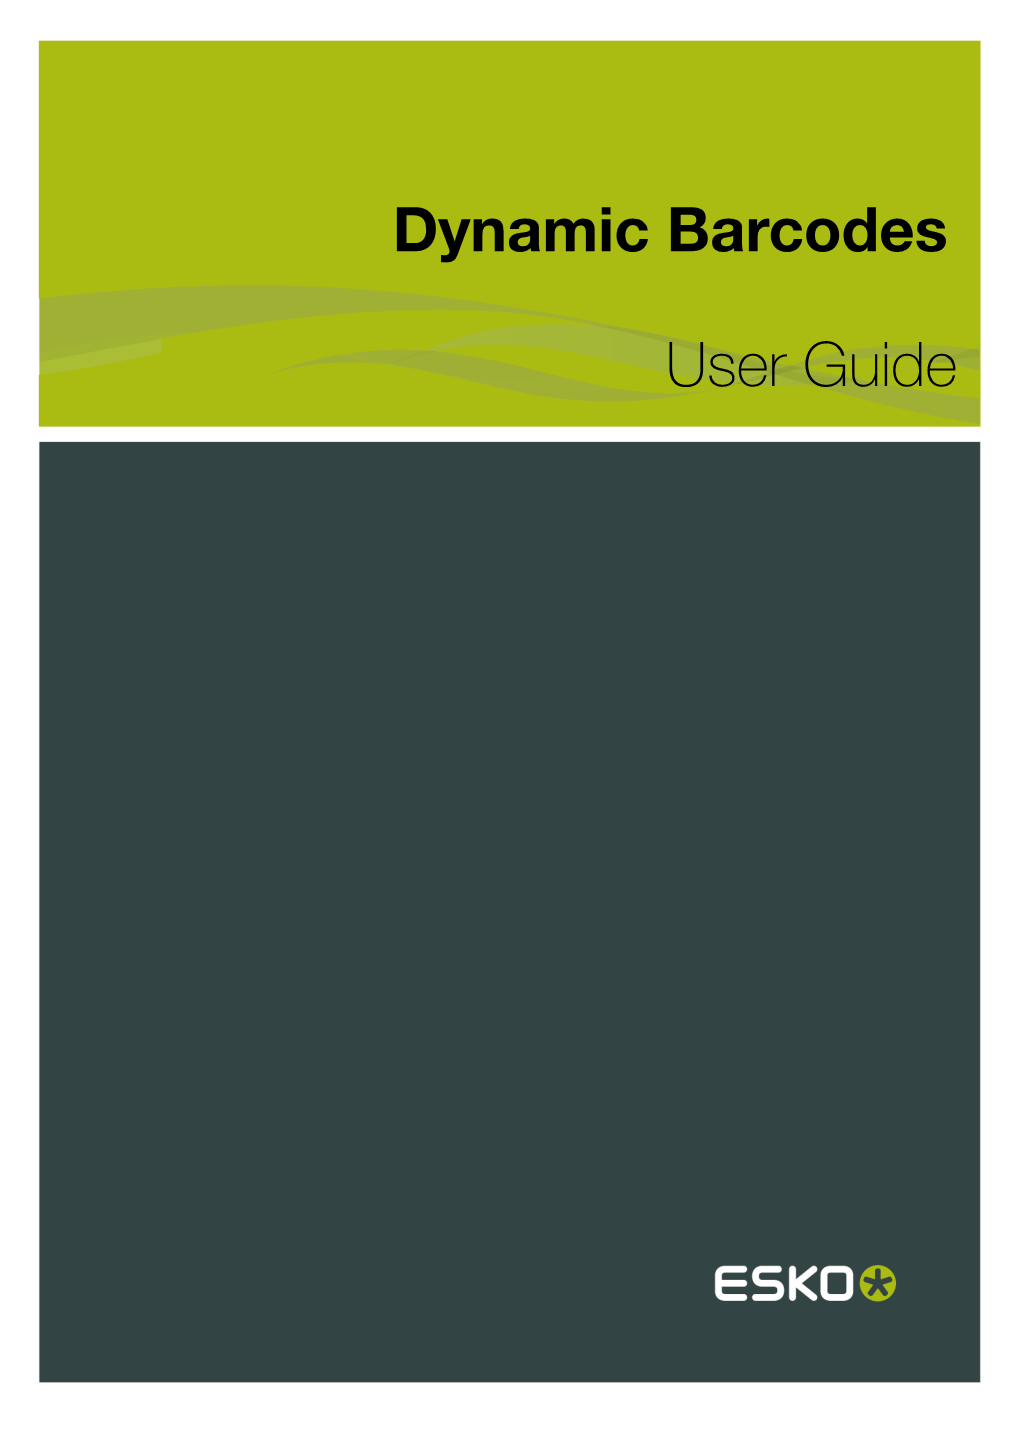 Dynamic Barcodes User Guide